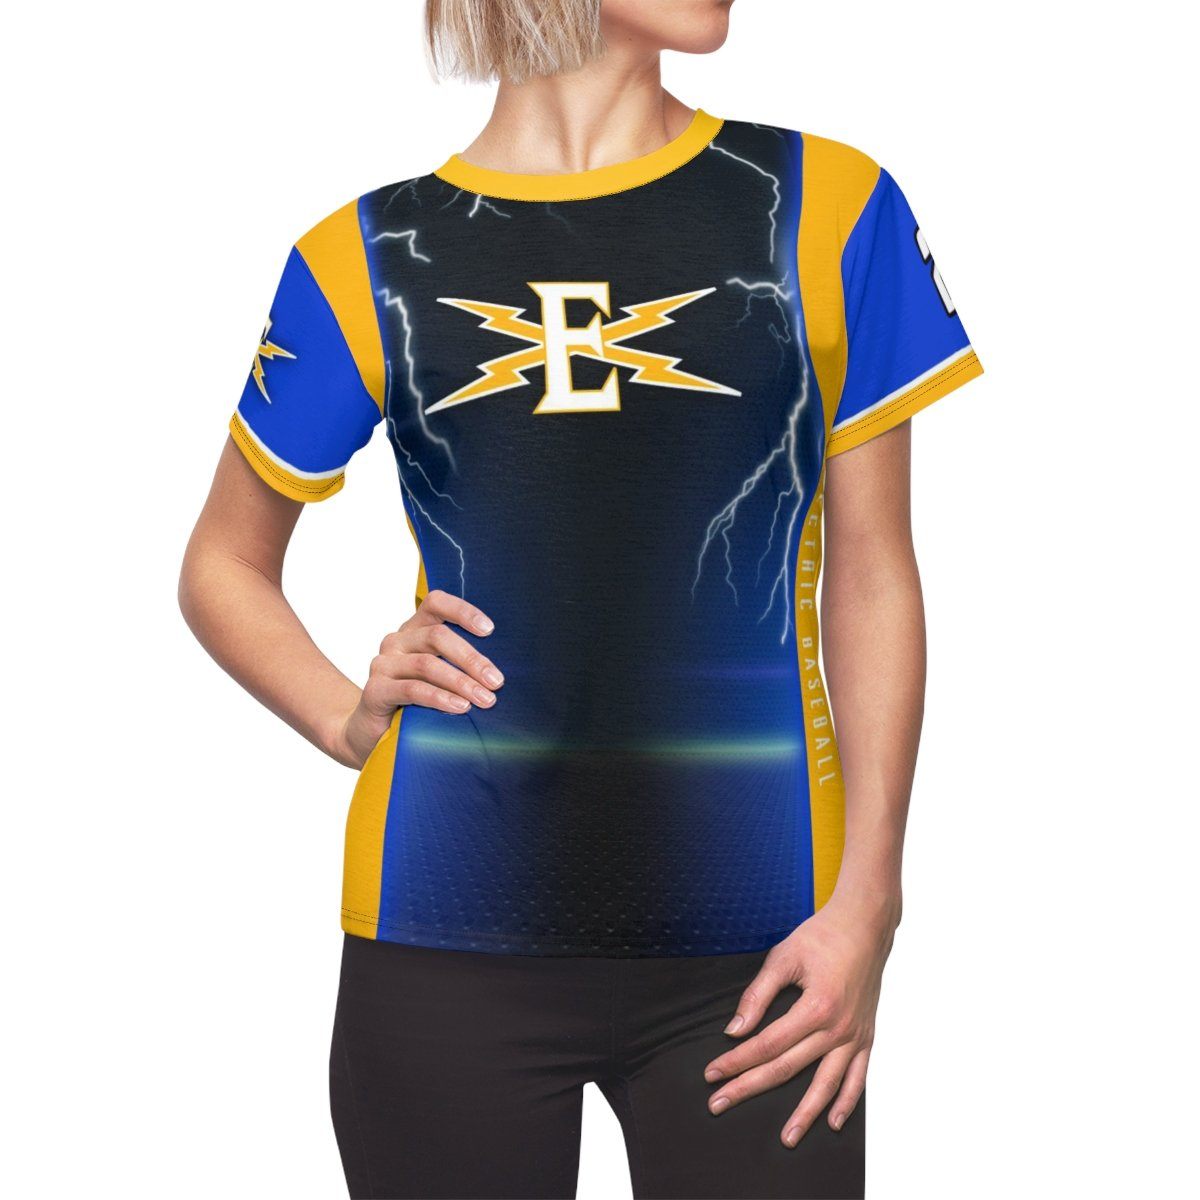 Electric - V.2 - Extreme Sportswear Women's Cut & Sew Template-Photoshop Template - Photo Solutions